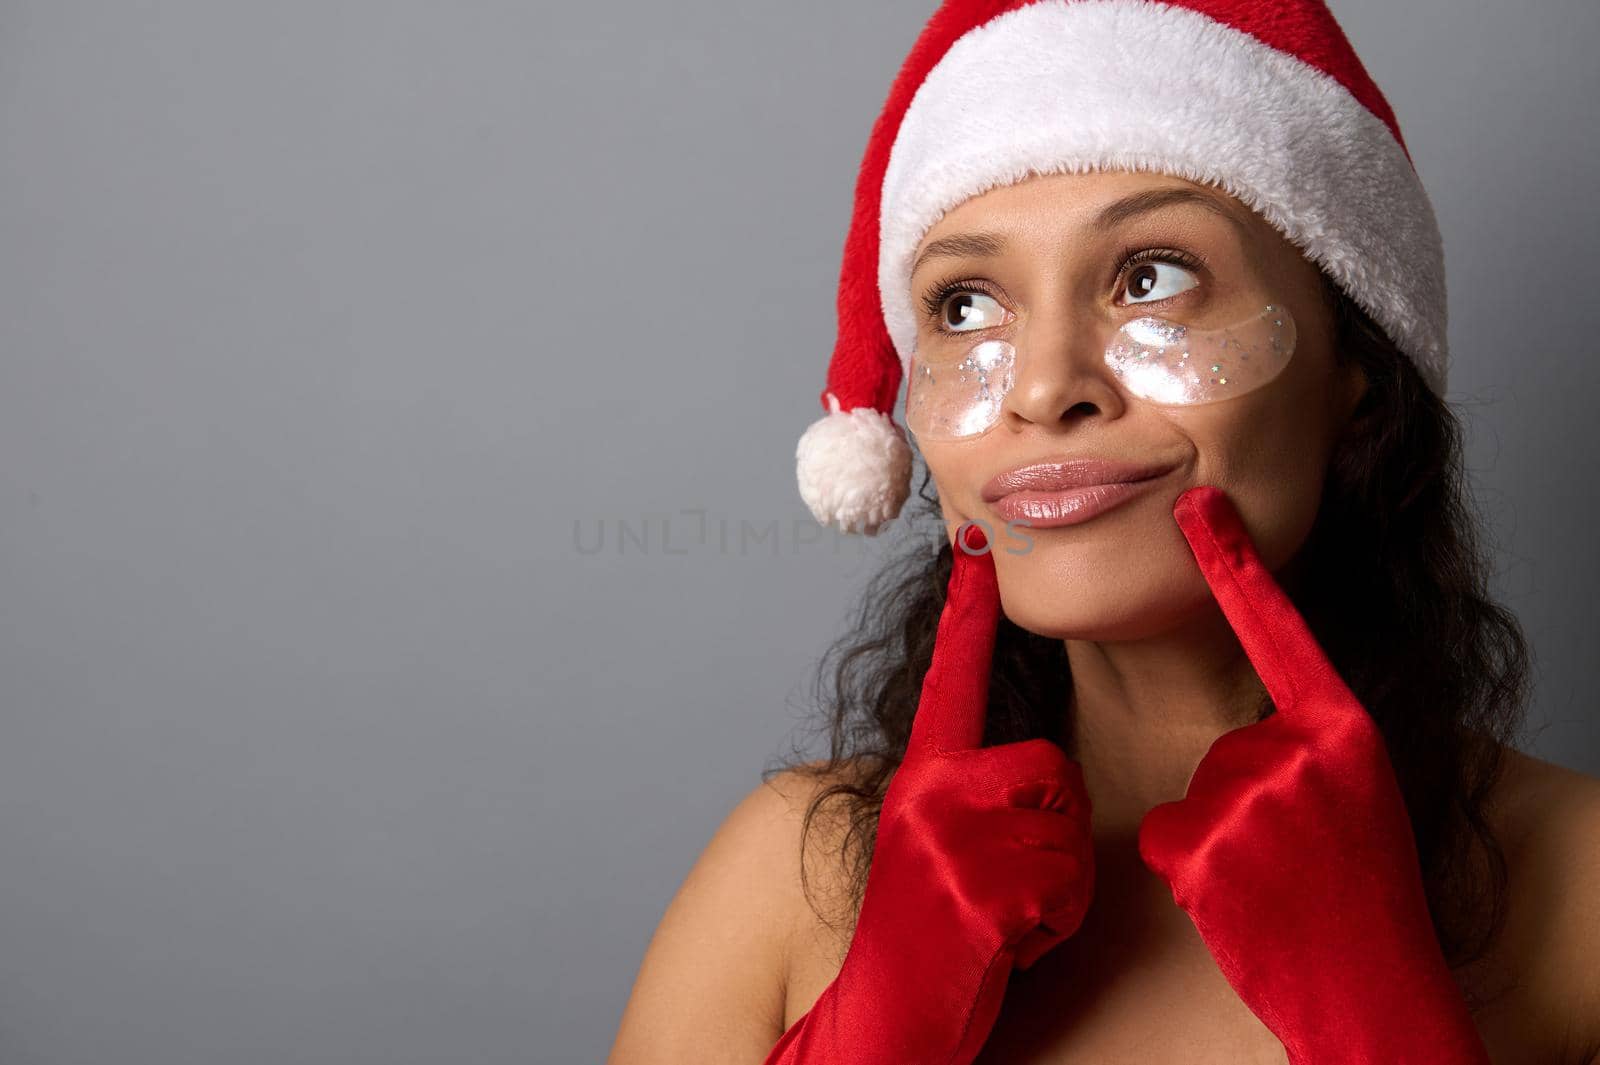 Attractive woman with smoothing eye patches , wearing Santa Claus hat and red satin gloves, presses her fingers to her lips and smiles, looking at copy space on gray background. Spa, skin care concept by artgf